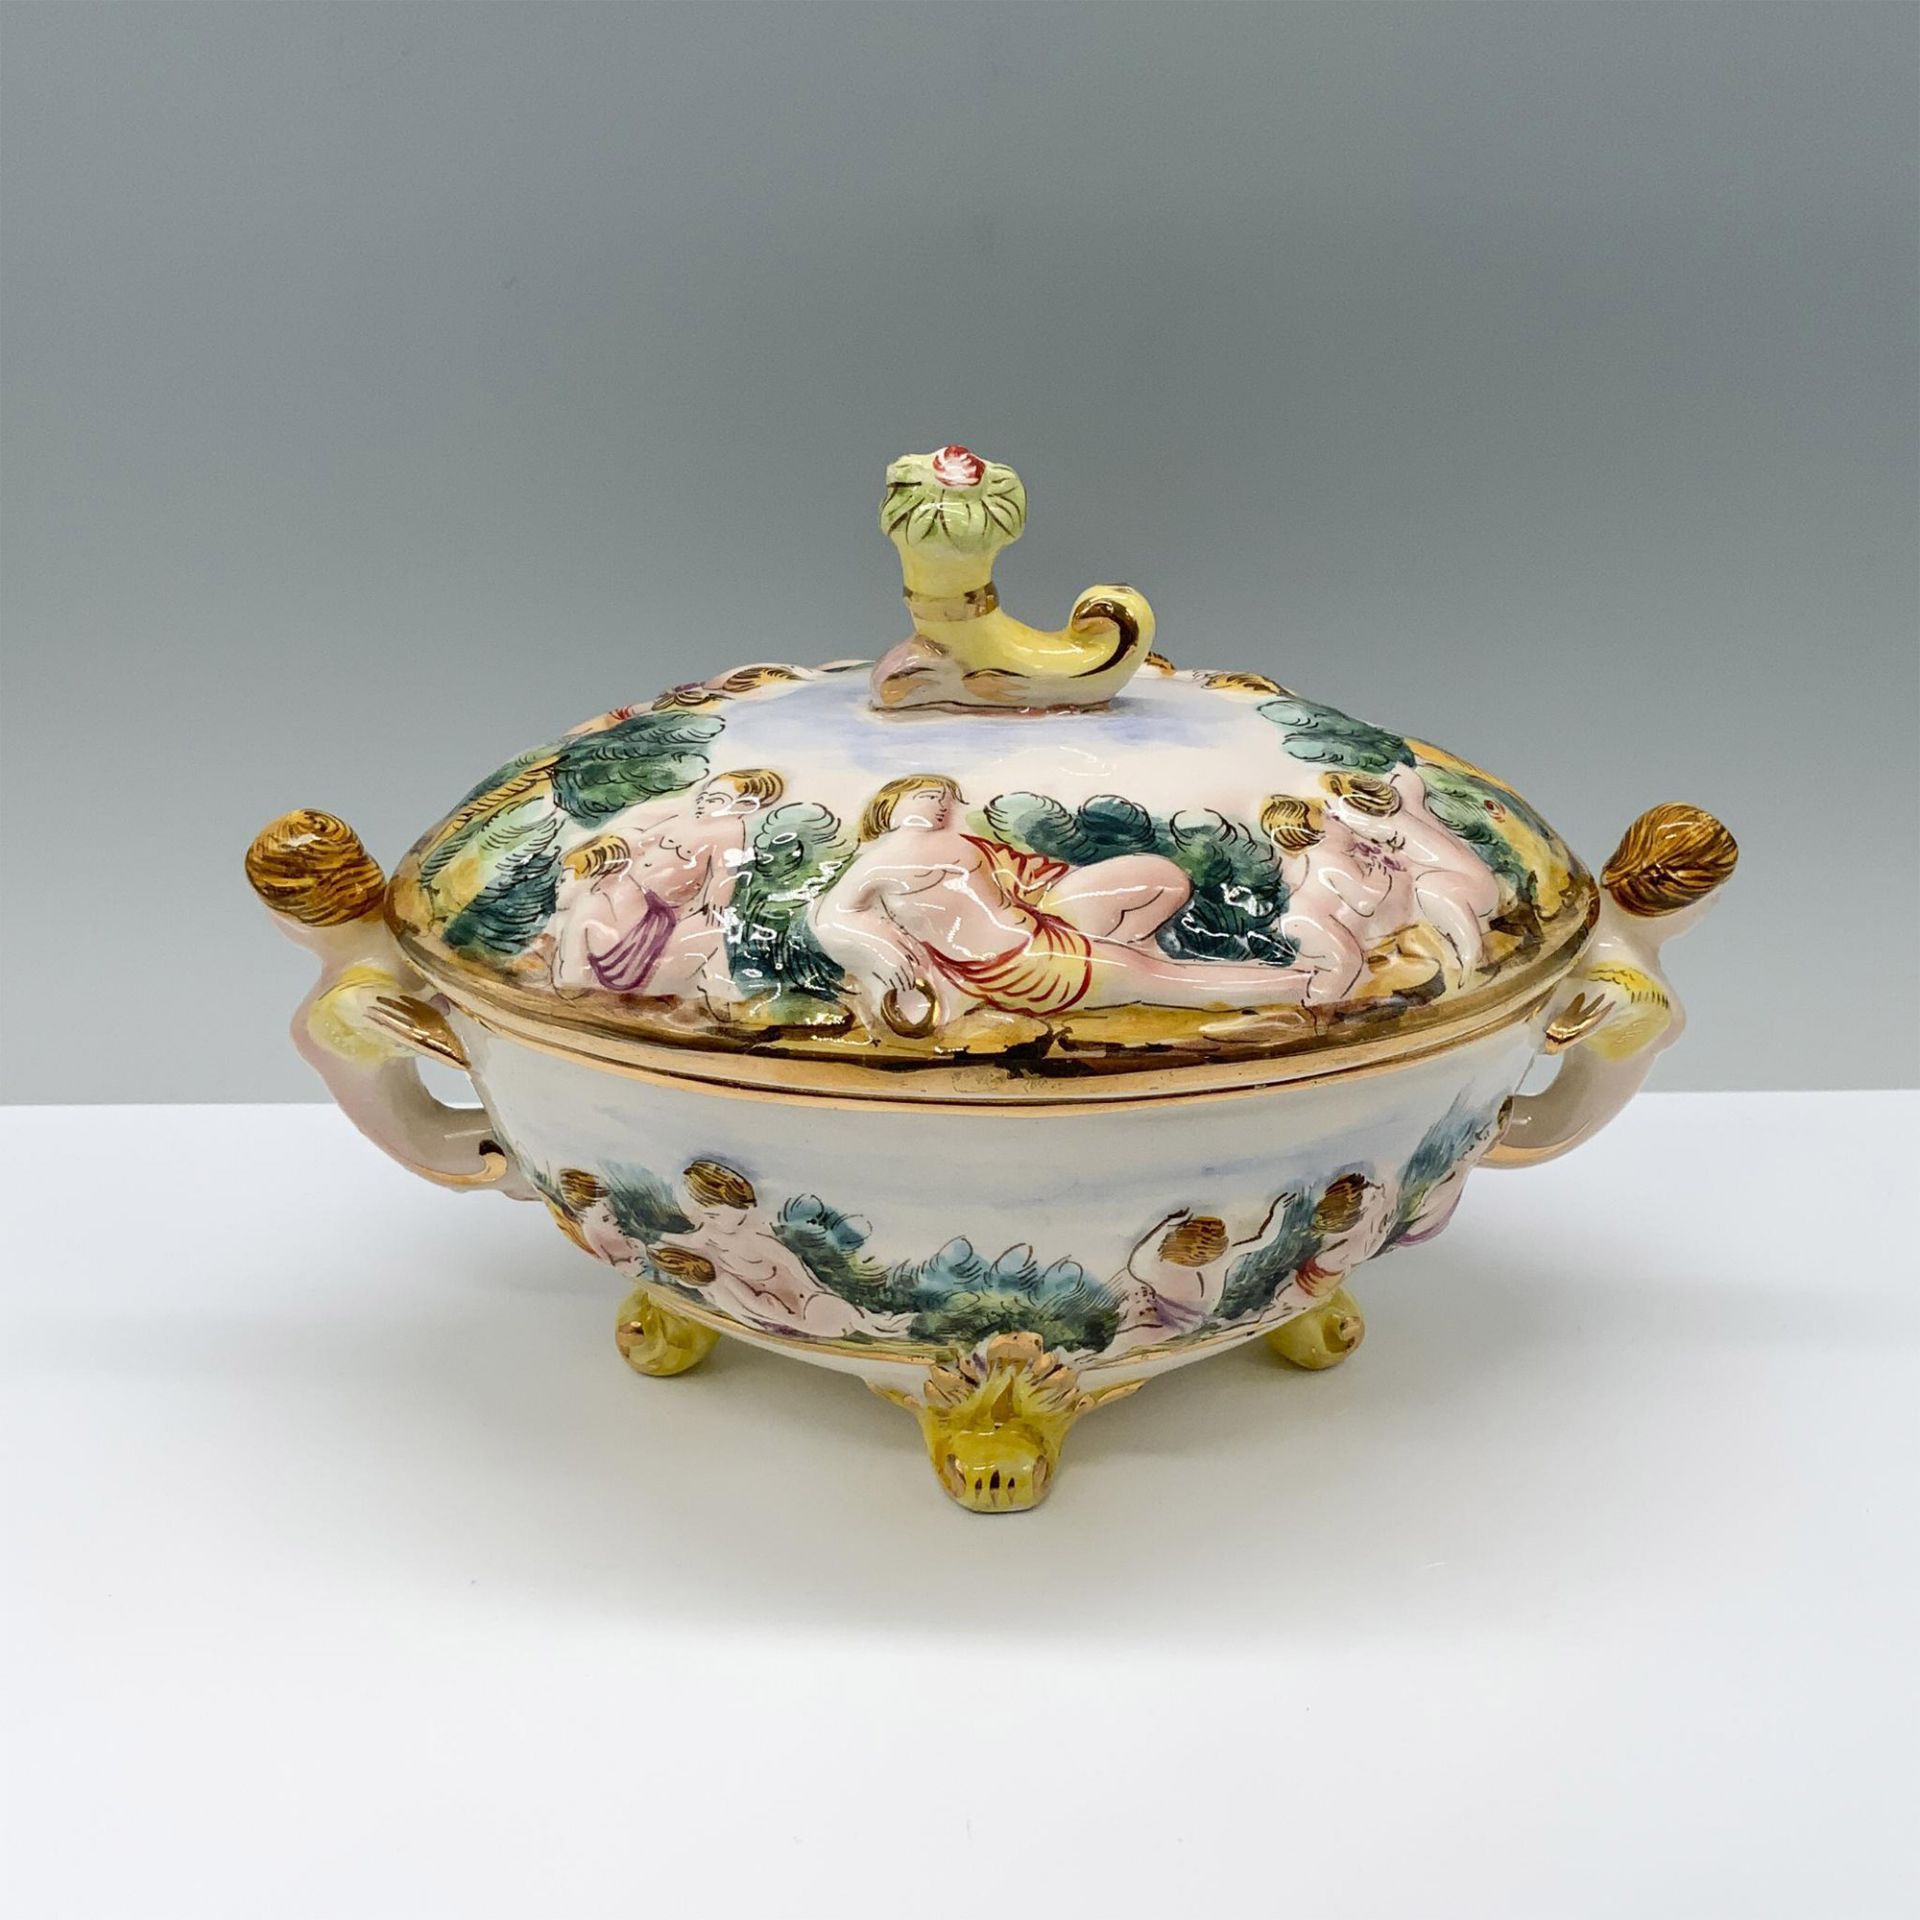 Capodimonte Porcelain Handled Serving Dish and Lid - Image 2 of 3